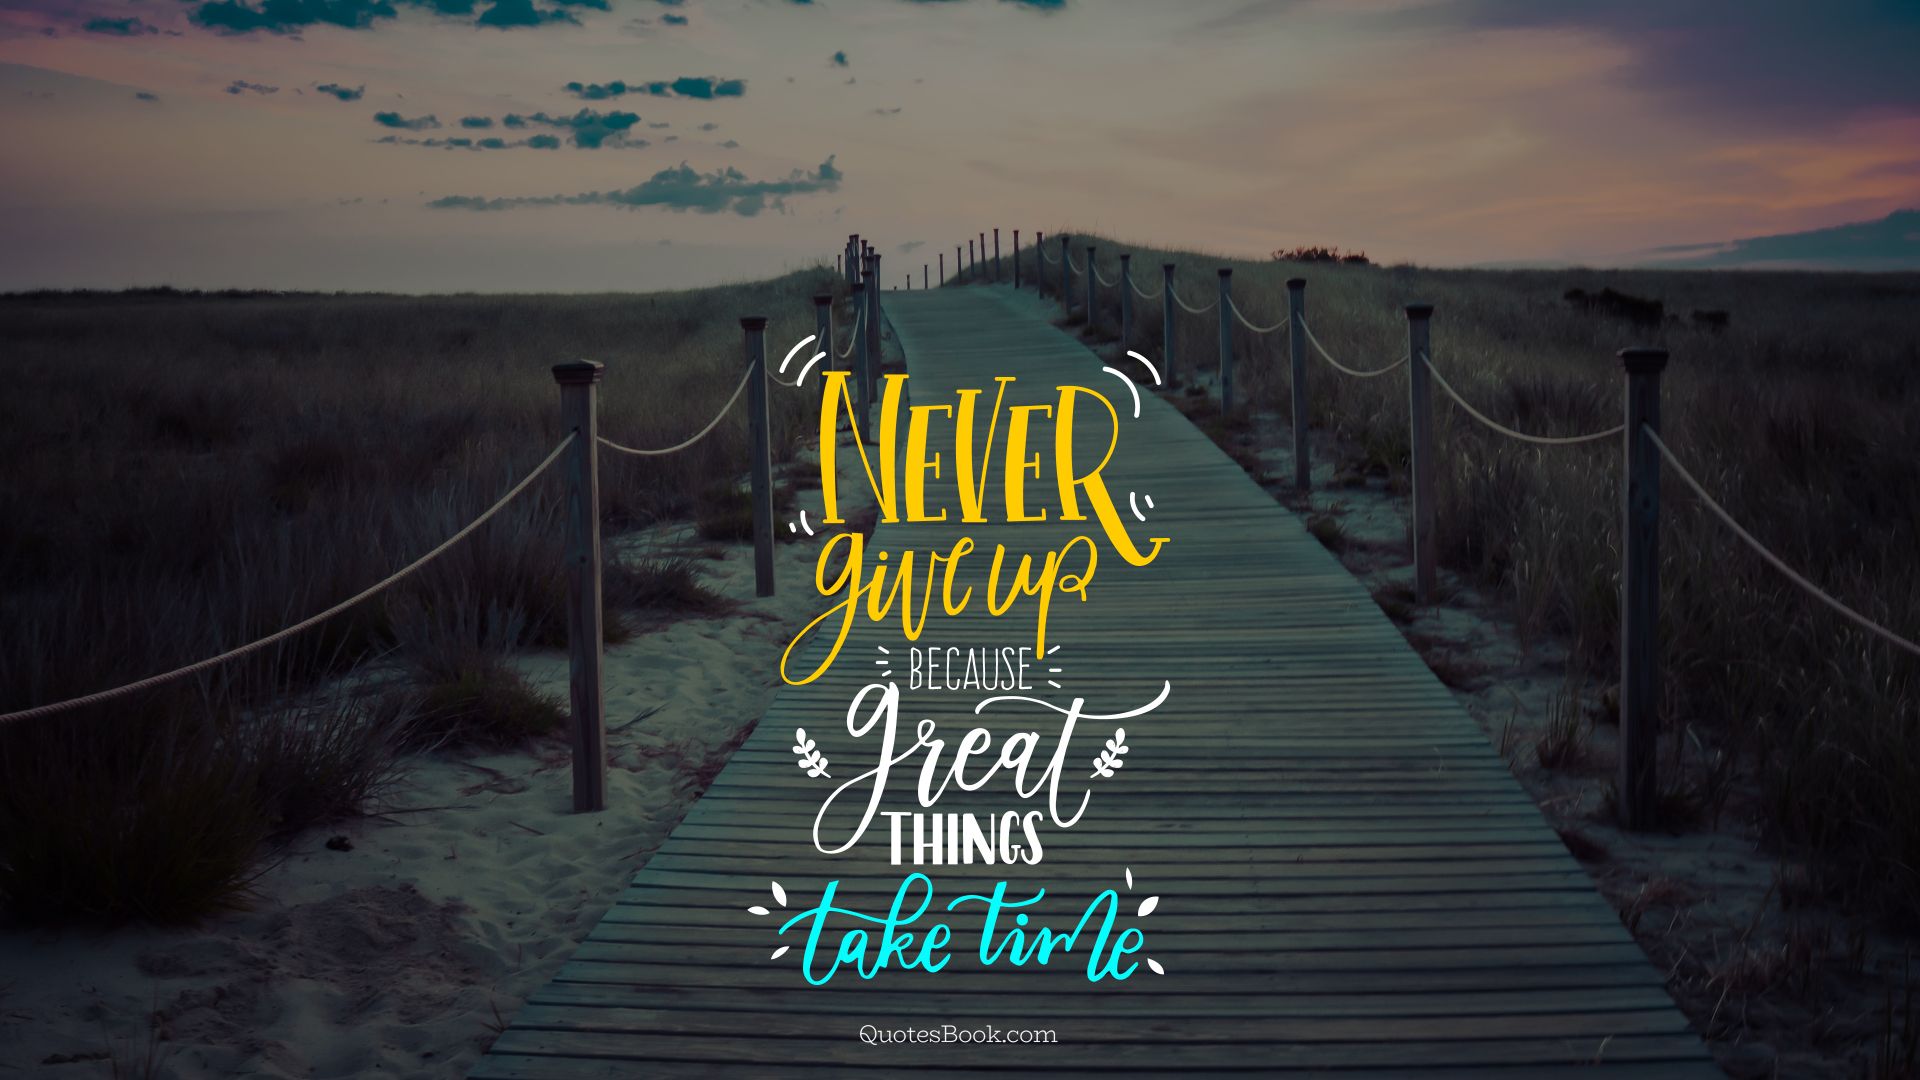 Never give up because great things take time - QuotesBook